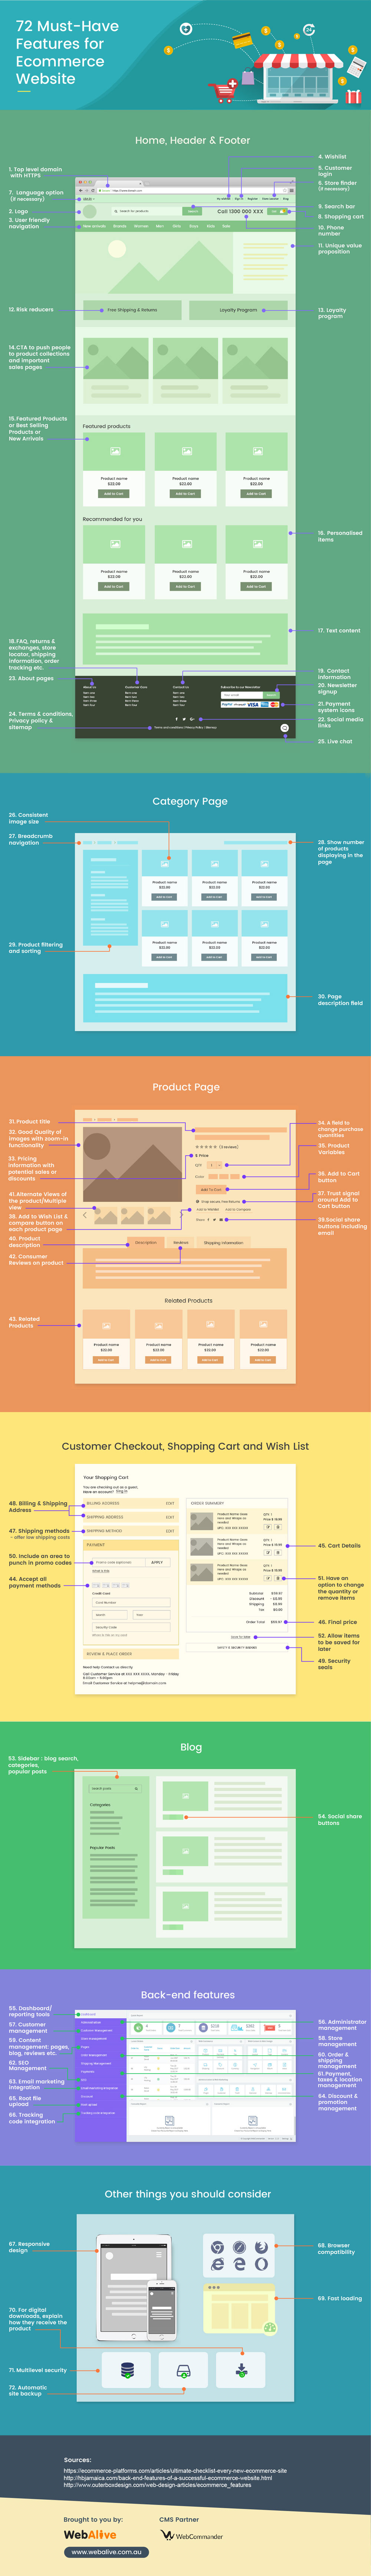 72 Top Must-have Features for an eCommerce Website [Infographic]